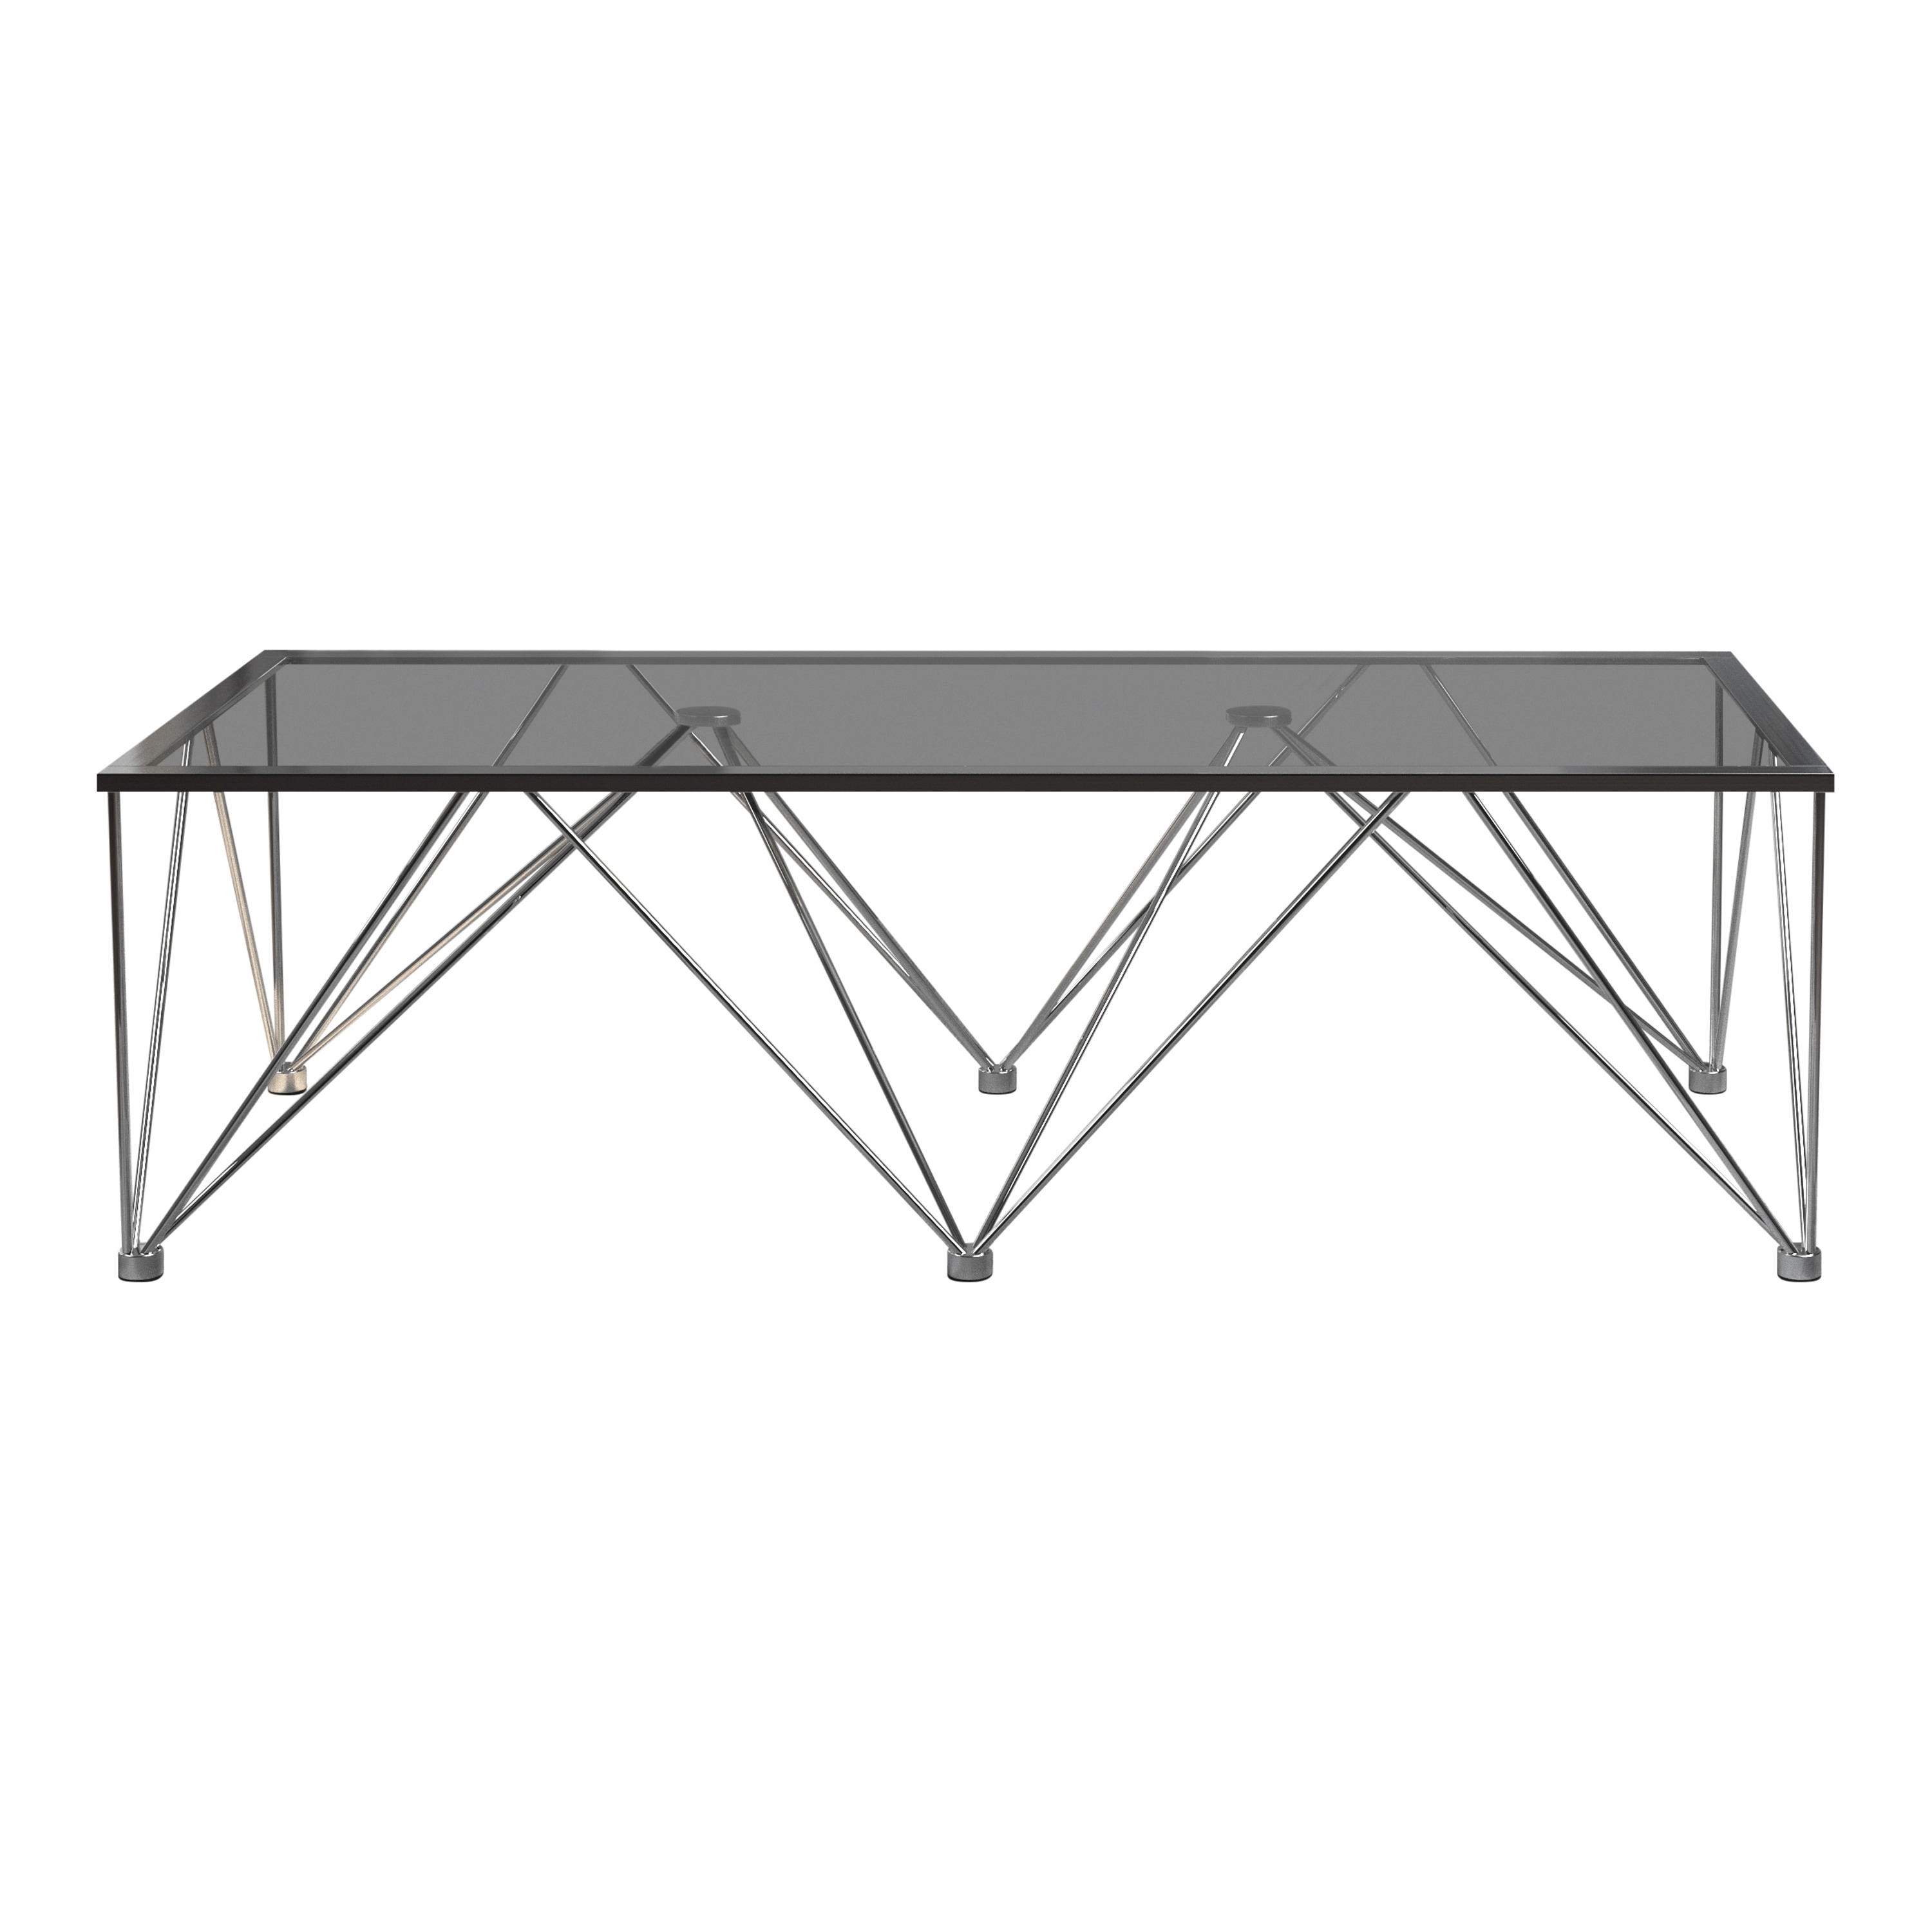 Porch Den Chanute Chrome And Grey Glass Top Square Coffee Table On Sale Overstock 31684232